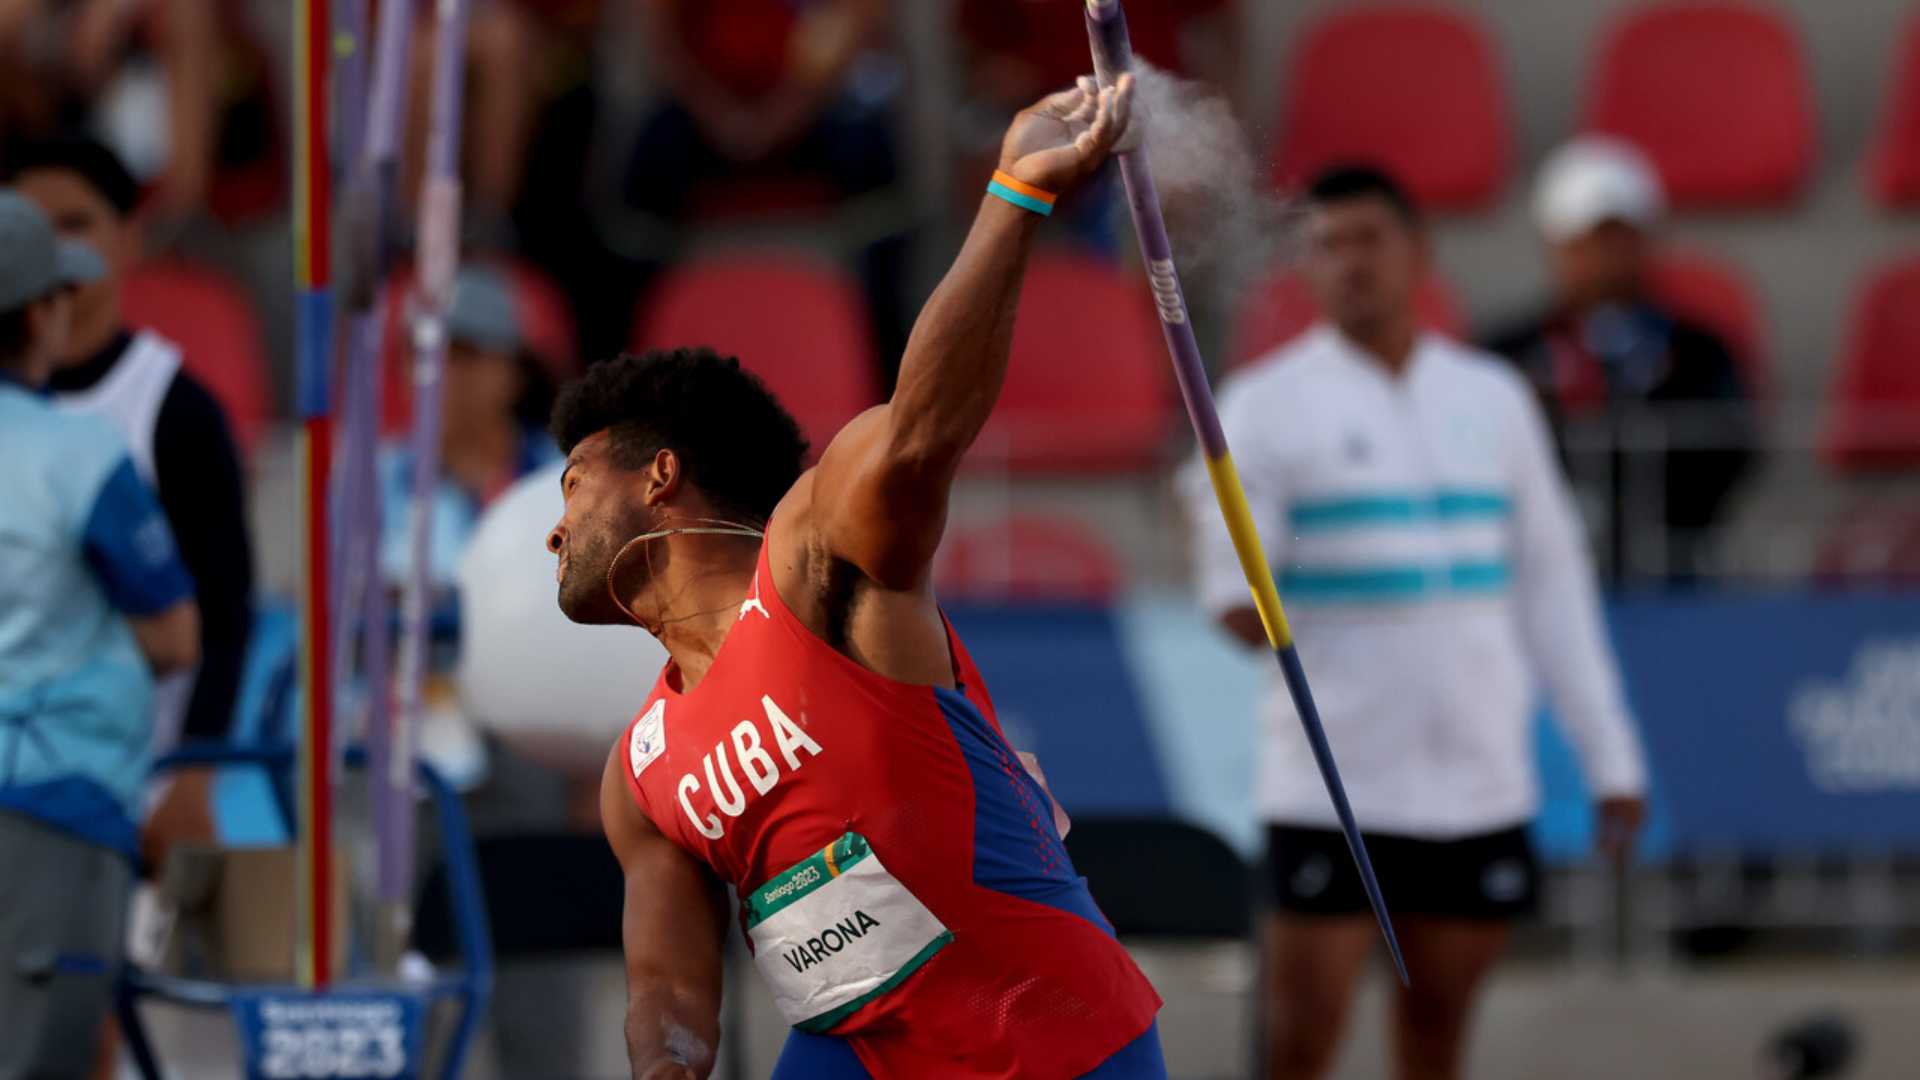 Guillermo Varona Sets New Parapan American Record in Javelin F46